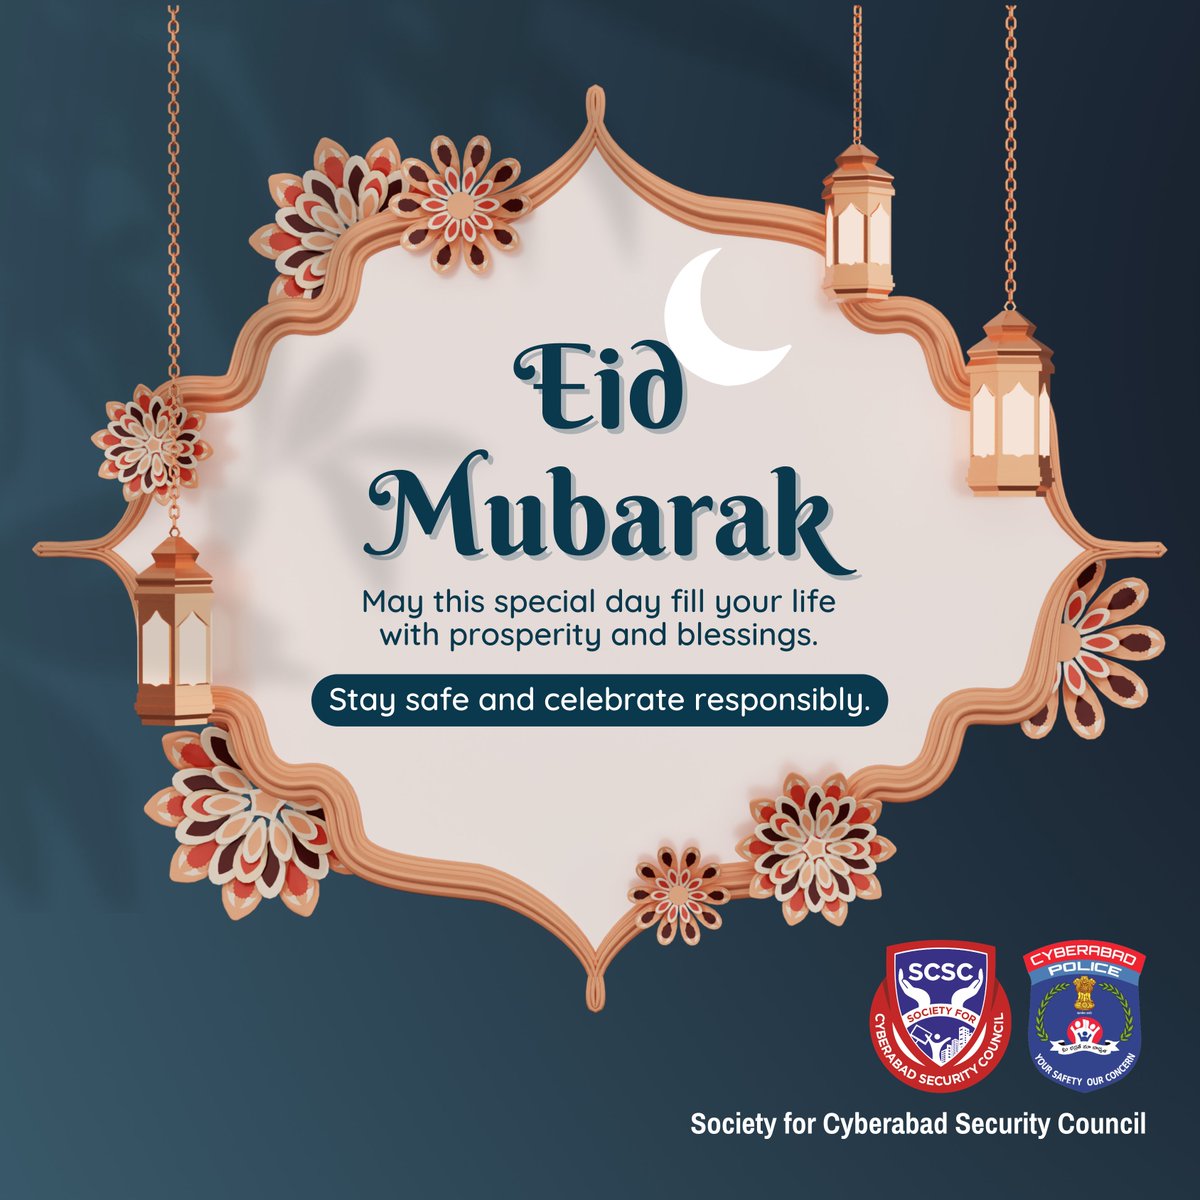 Happy Eid from @SCSC_Cyberabad! Wishing you and your loved ones abundant joy, blessings, and love on this special day! #EidUlFitr #EidMubarak #HappyEid